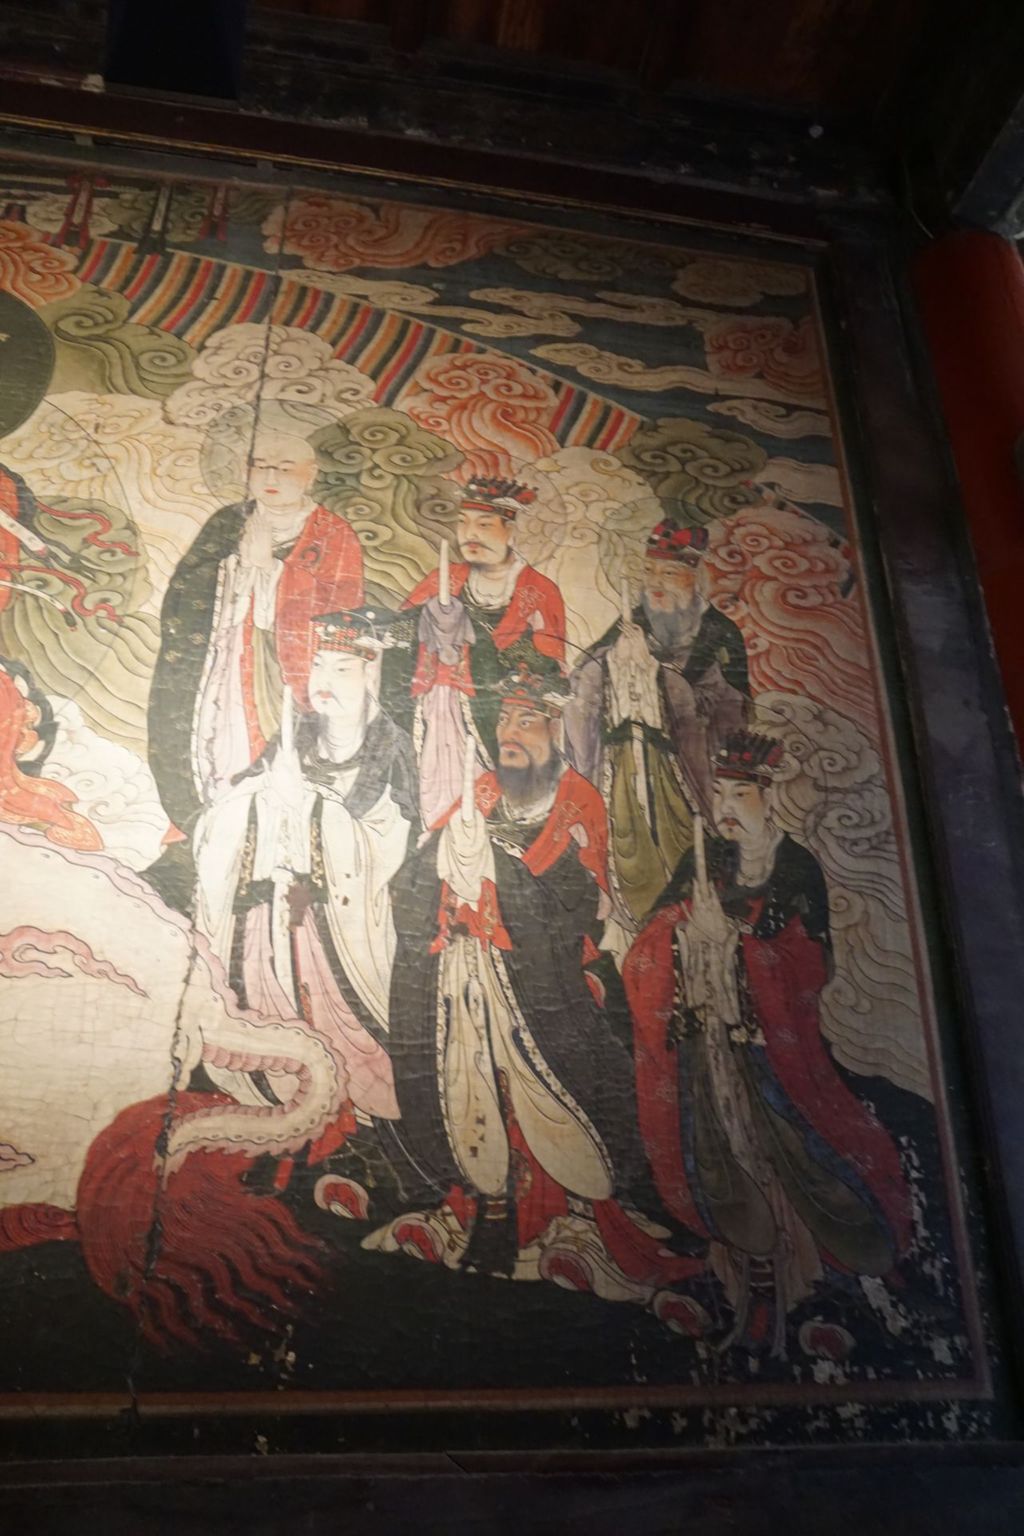 Miniature of Dizang Bodhisattva with the Ten Kings of Hell Mural from Zhihua Hall (Zhihuadian, Hall of Transforming Wisdom), Elder Min and five of Ten Kings of Hell